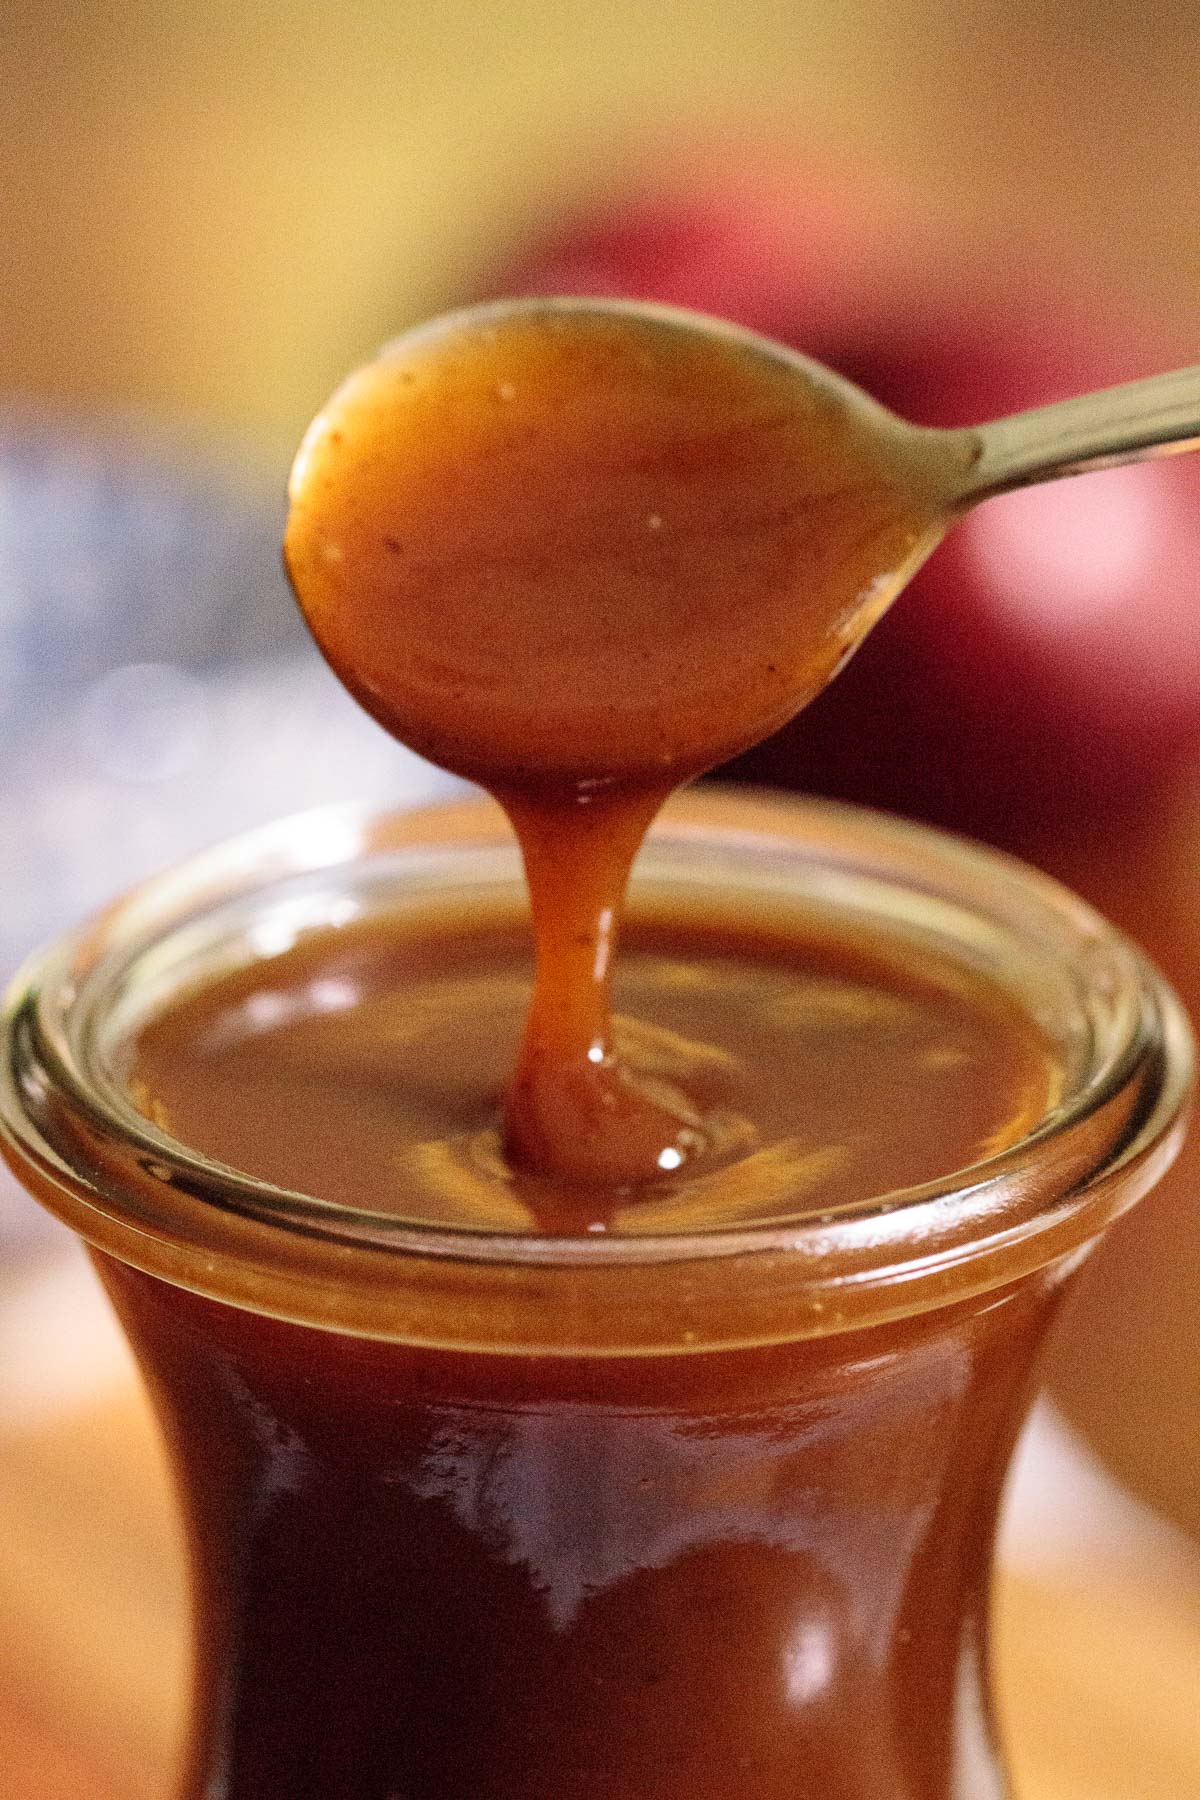 Ultra closeup photo of a spoon of Apple Cider Caramel Sauce being drizzled back into a glass jar of the sauce.